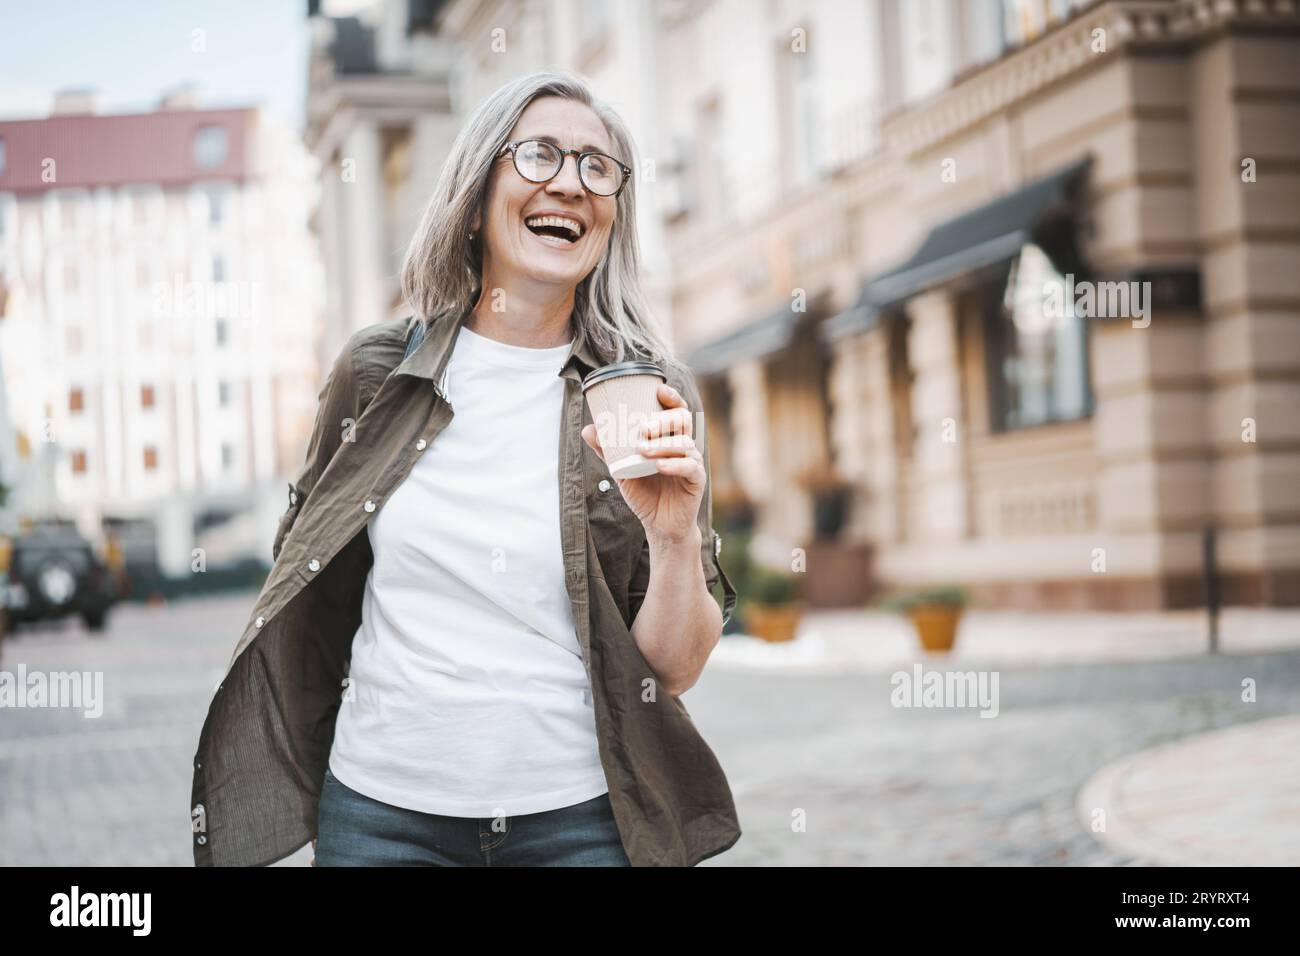 Concept of happy old age through image of silver-haired mature senior woman walking in city, enjoying cup of coffee. Woman is ca Stock Photo